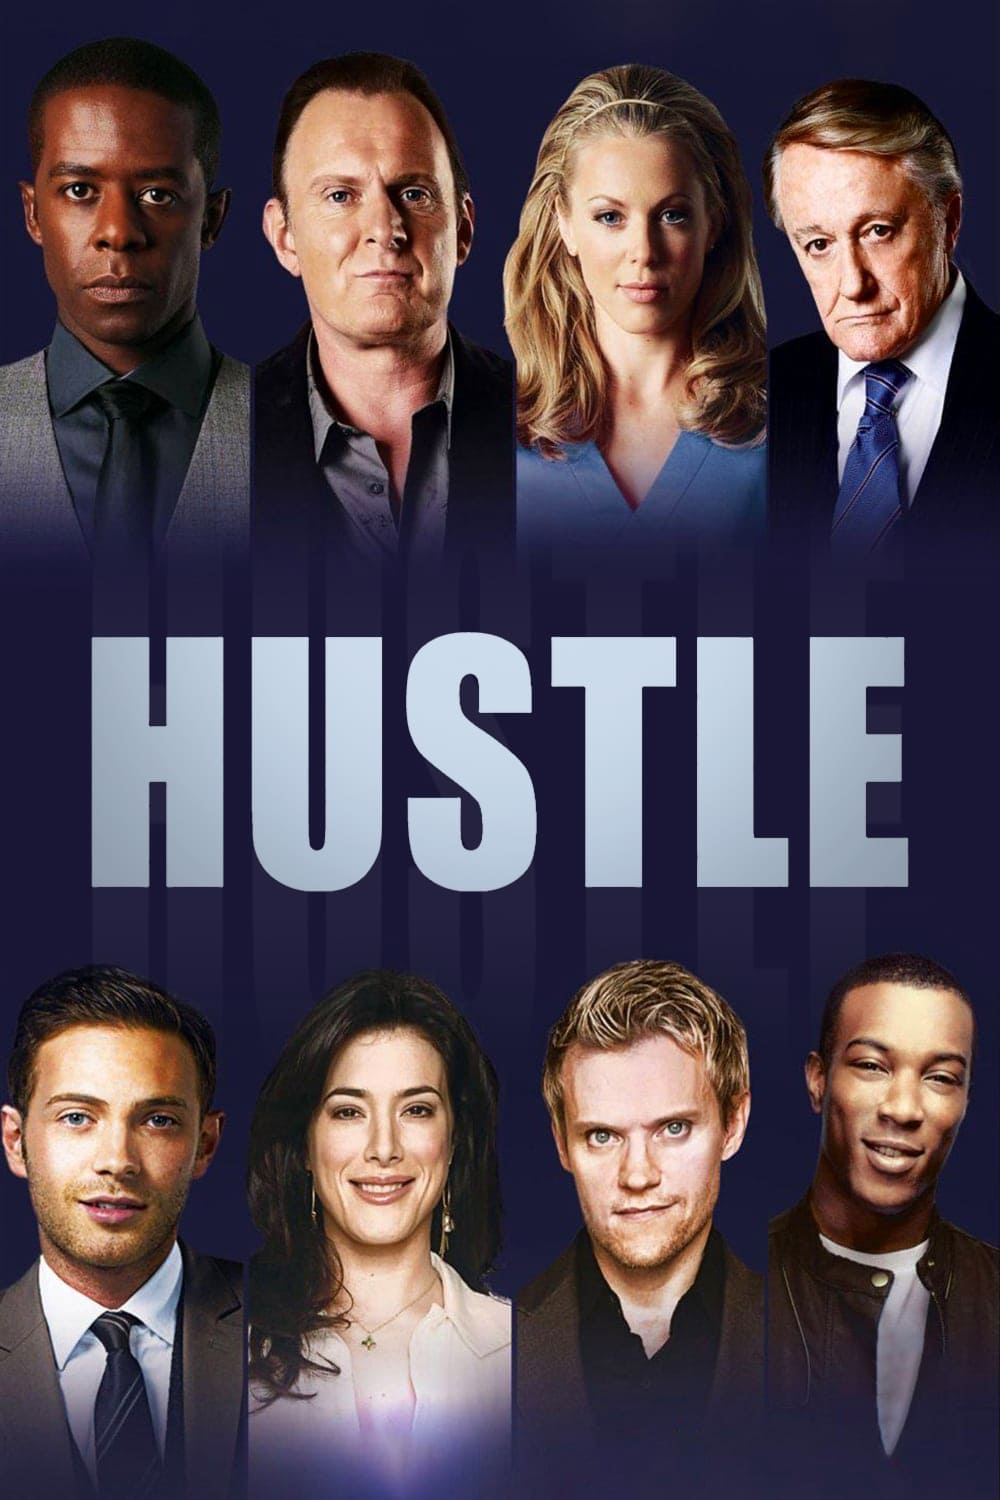 Hustle TV Shows About Fake Identity